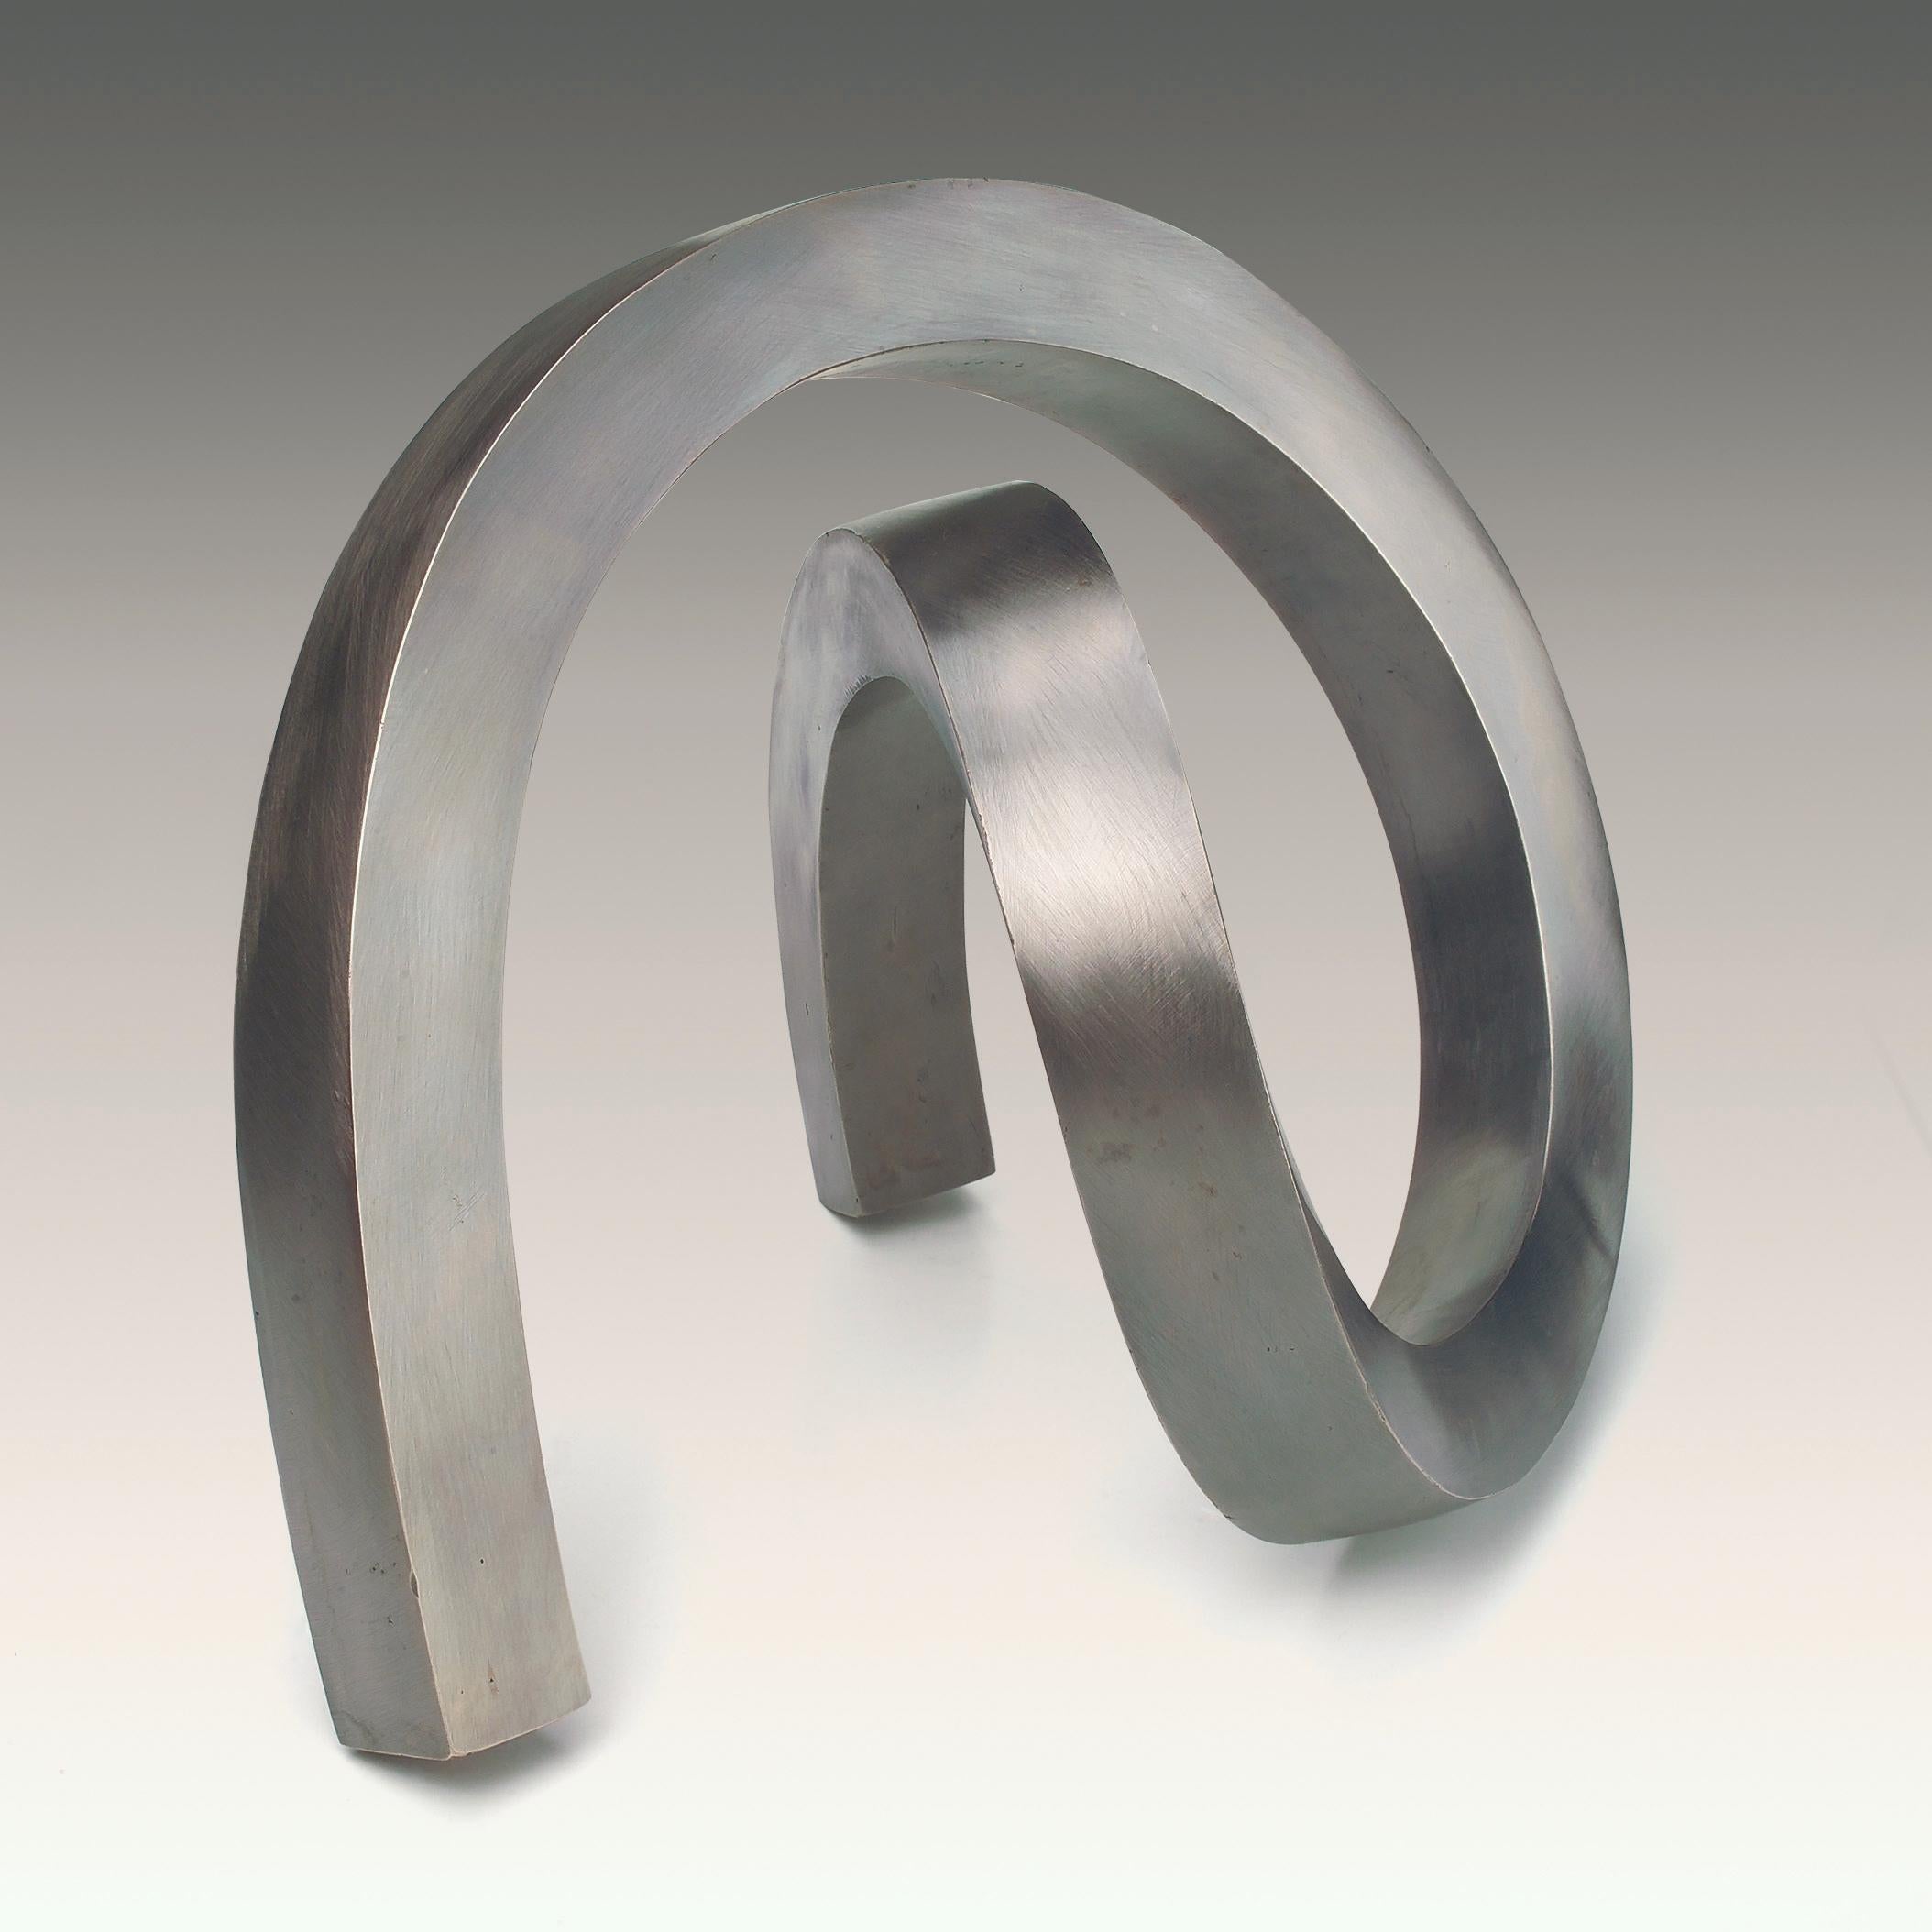 Silver Sculpture 'Curva I' by Carola Eggeling
Abstract sculpture with beautiful curved lines.

German silver sculpture
Silver - Alpaca 
Certificate of authenticity
Numbered and signed artwork
Limited edition of 9
Measures: H. 26 x 34 x 12